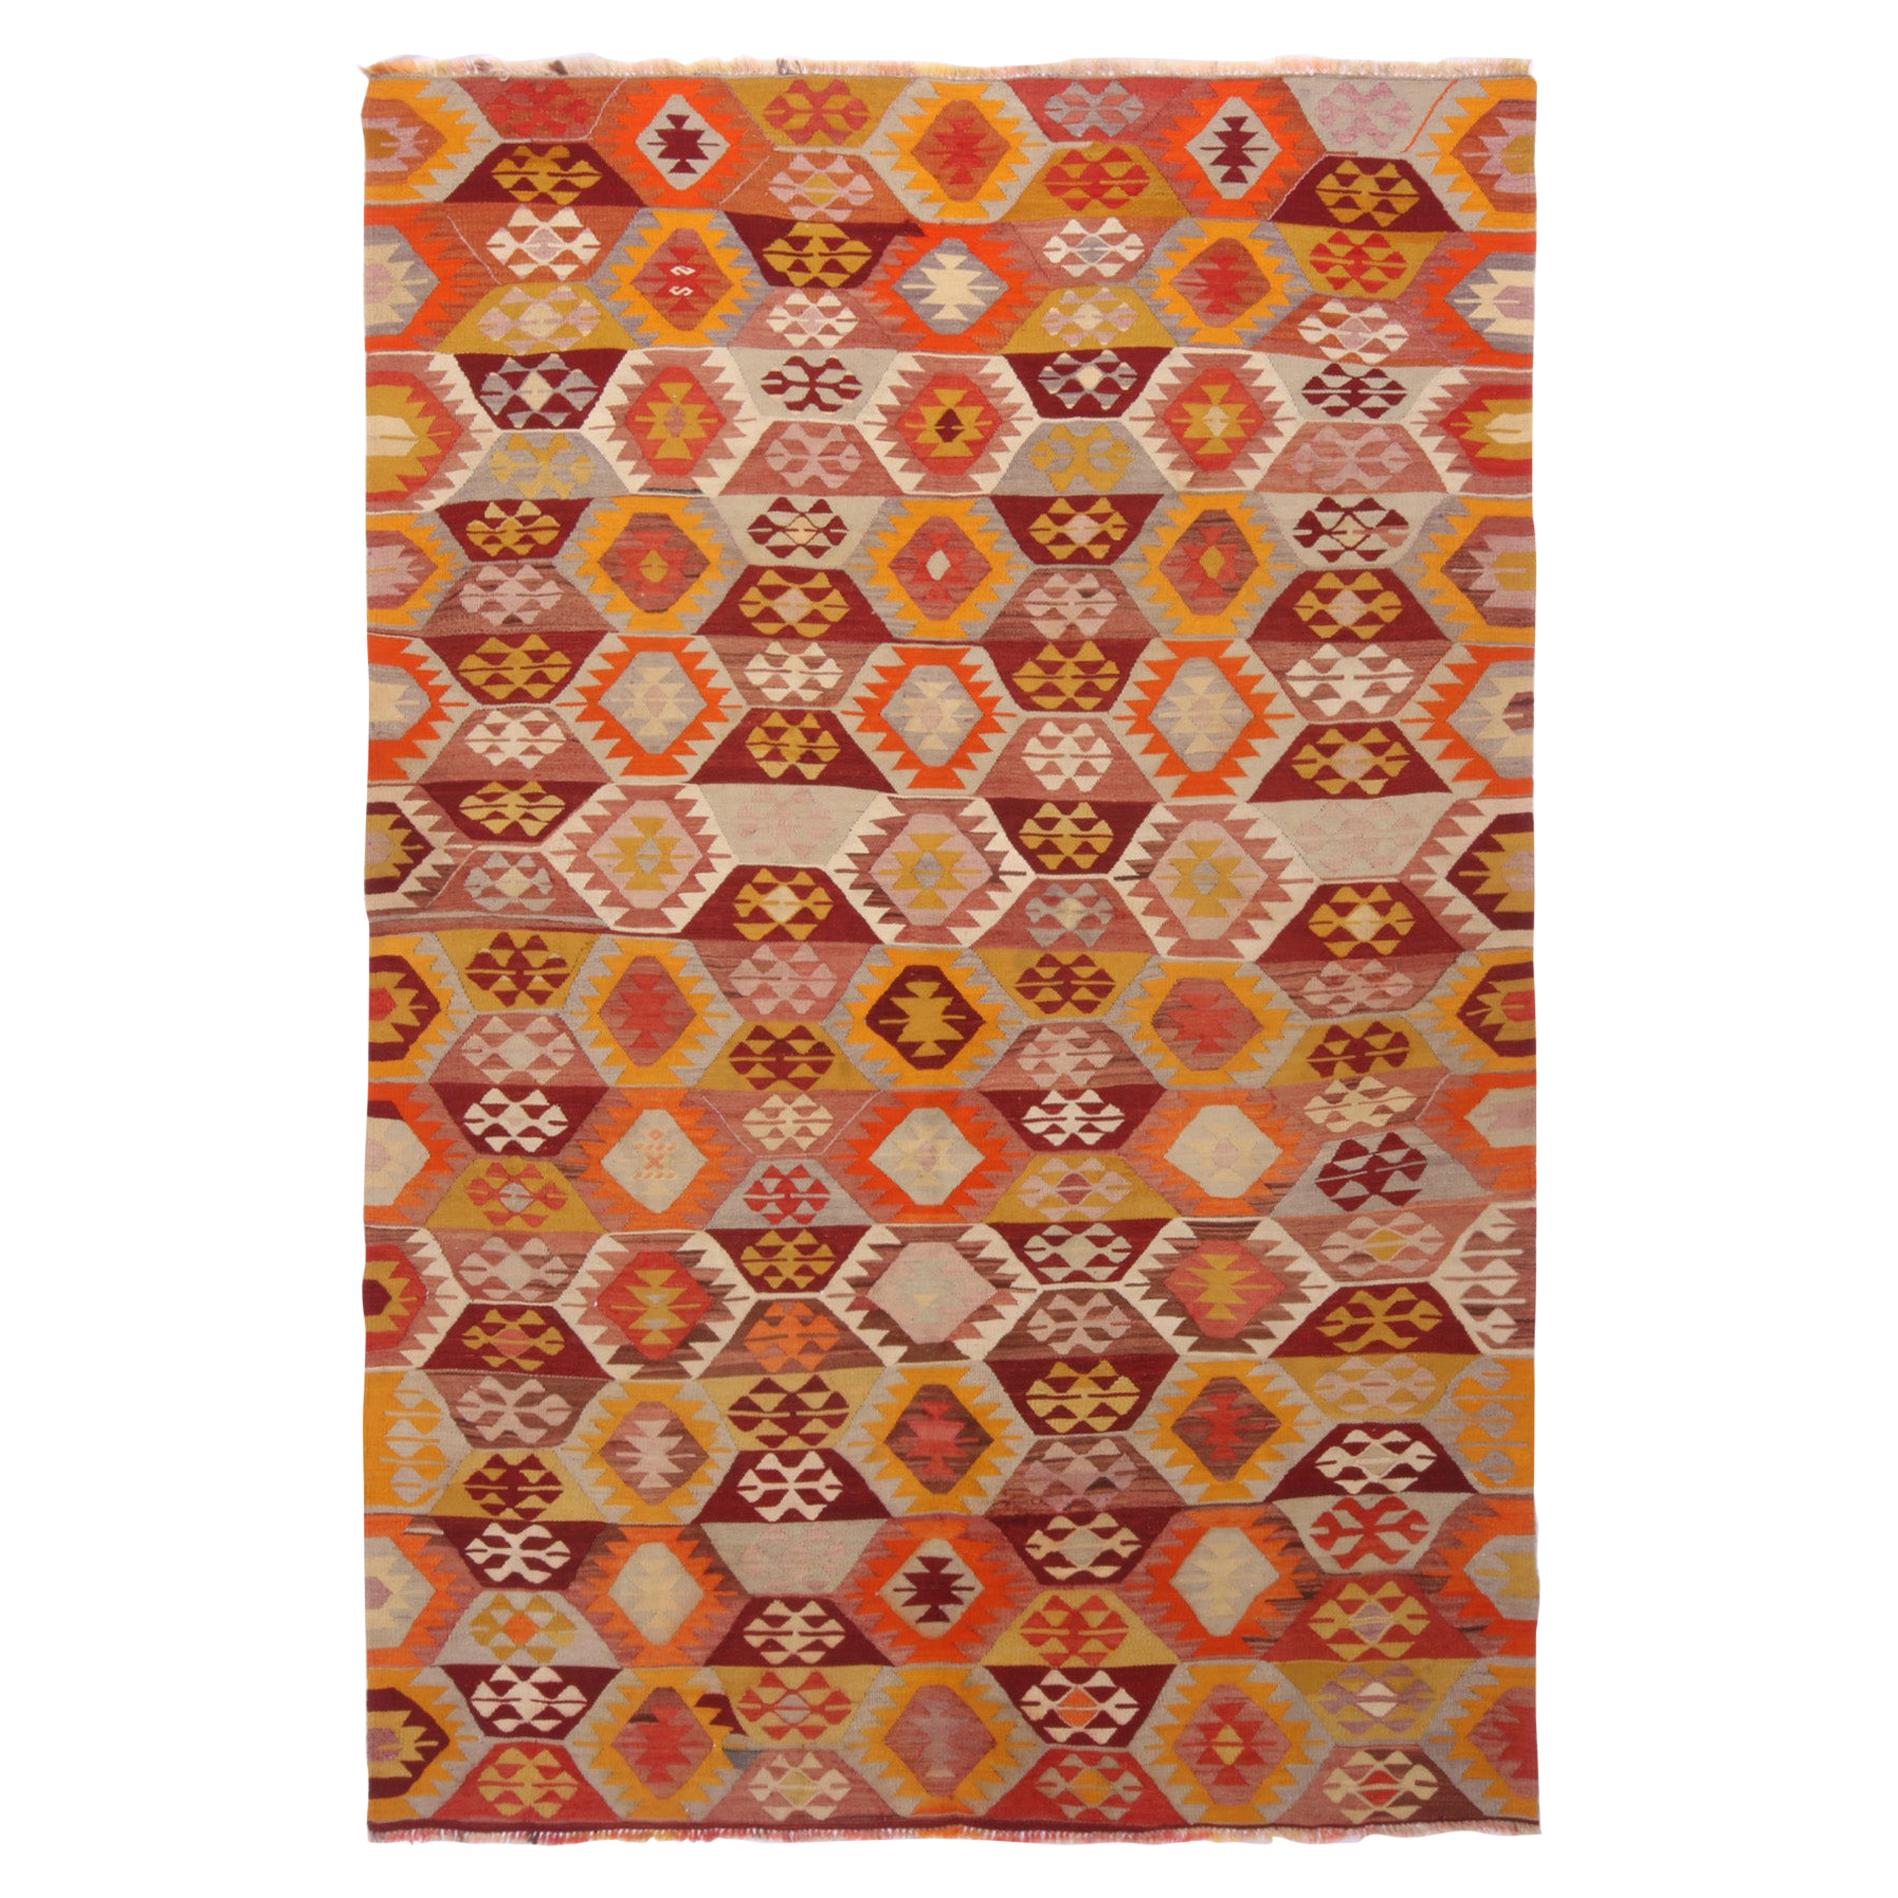 Geometric Gold-Yellow and Blue Wool Kilim Rug with Orange Accent by Rug & Kilim For Sale